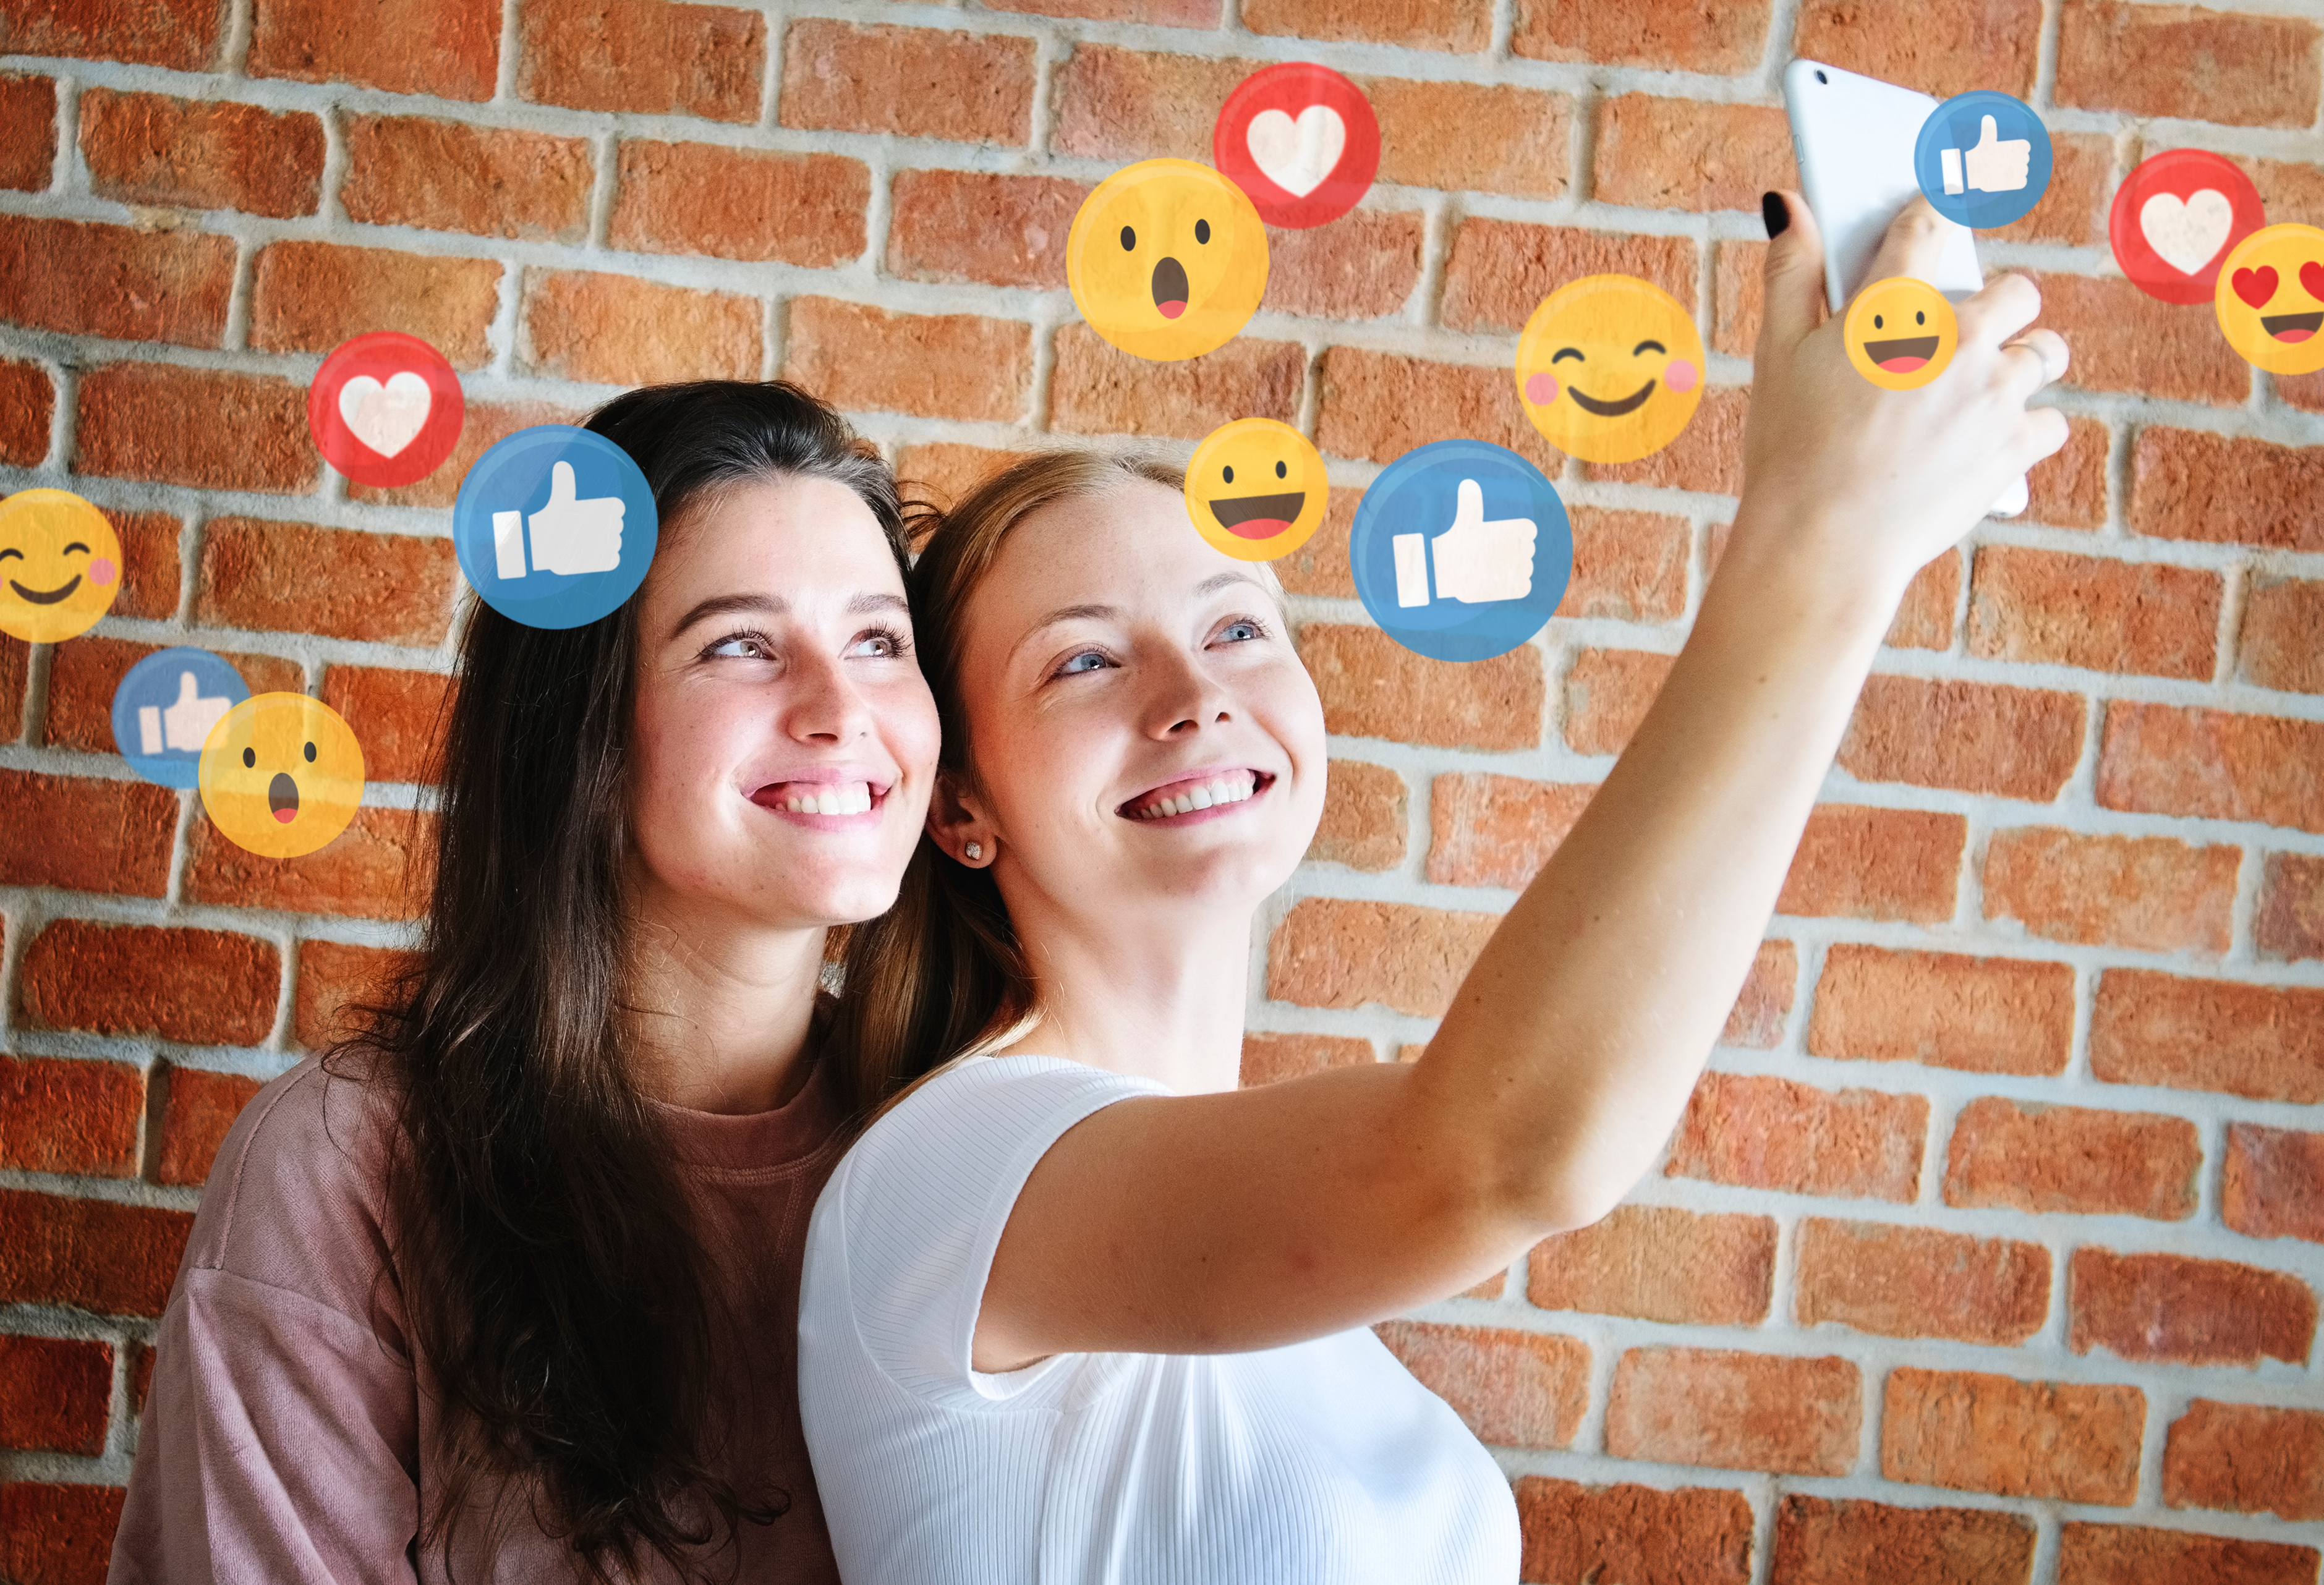 Two young women take a selfie together. Above them are social media icons such as emojis, hearts and thumbs up. A brick wall can be seen in the background.